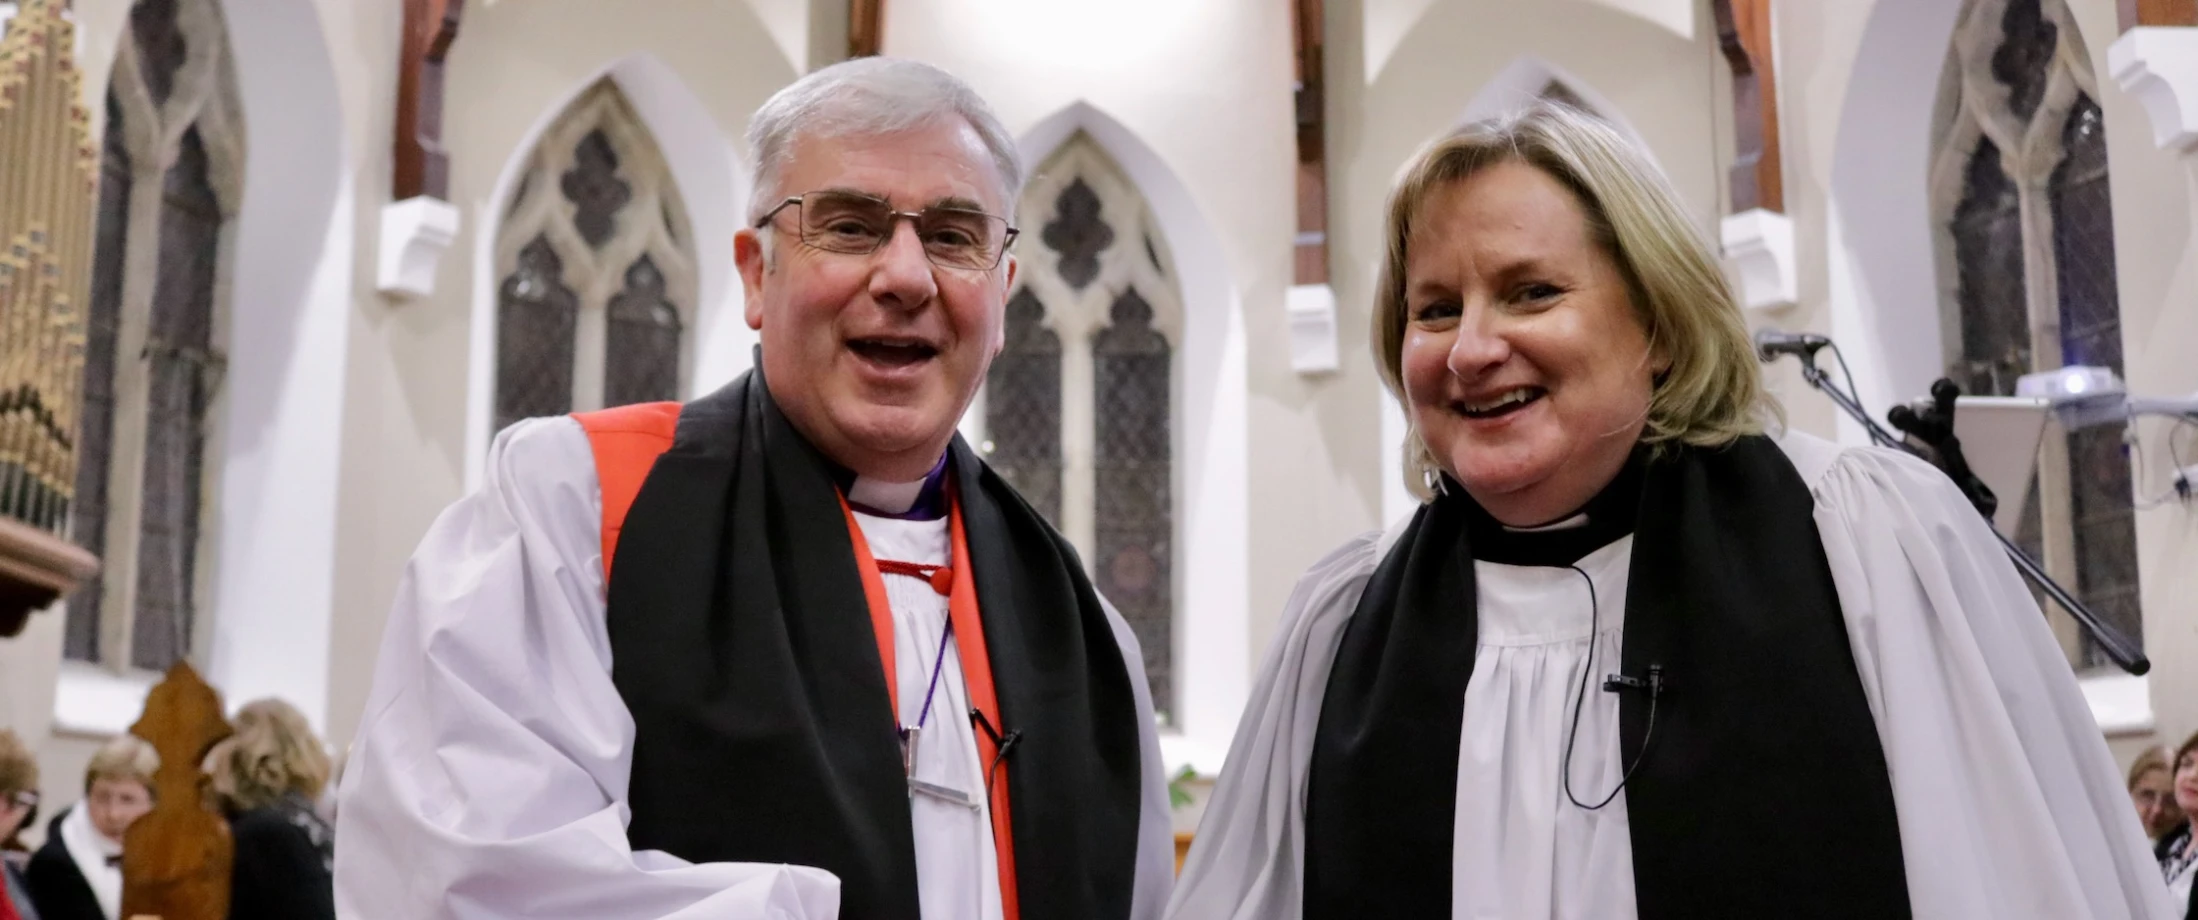 A new rector for Kilkeel